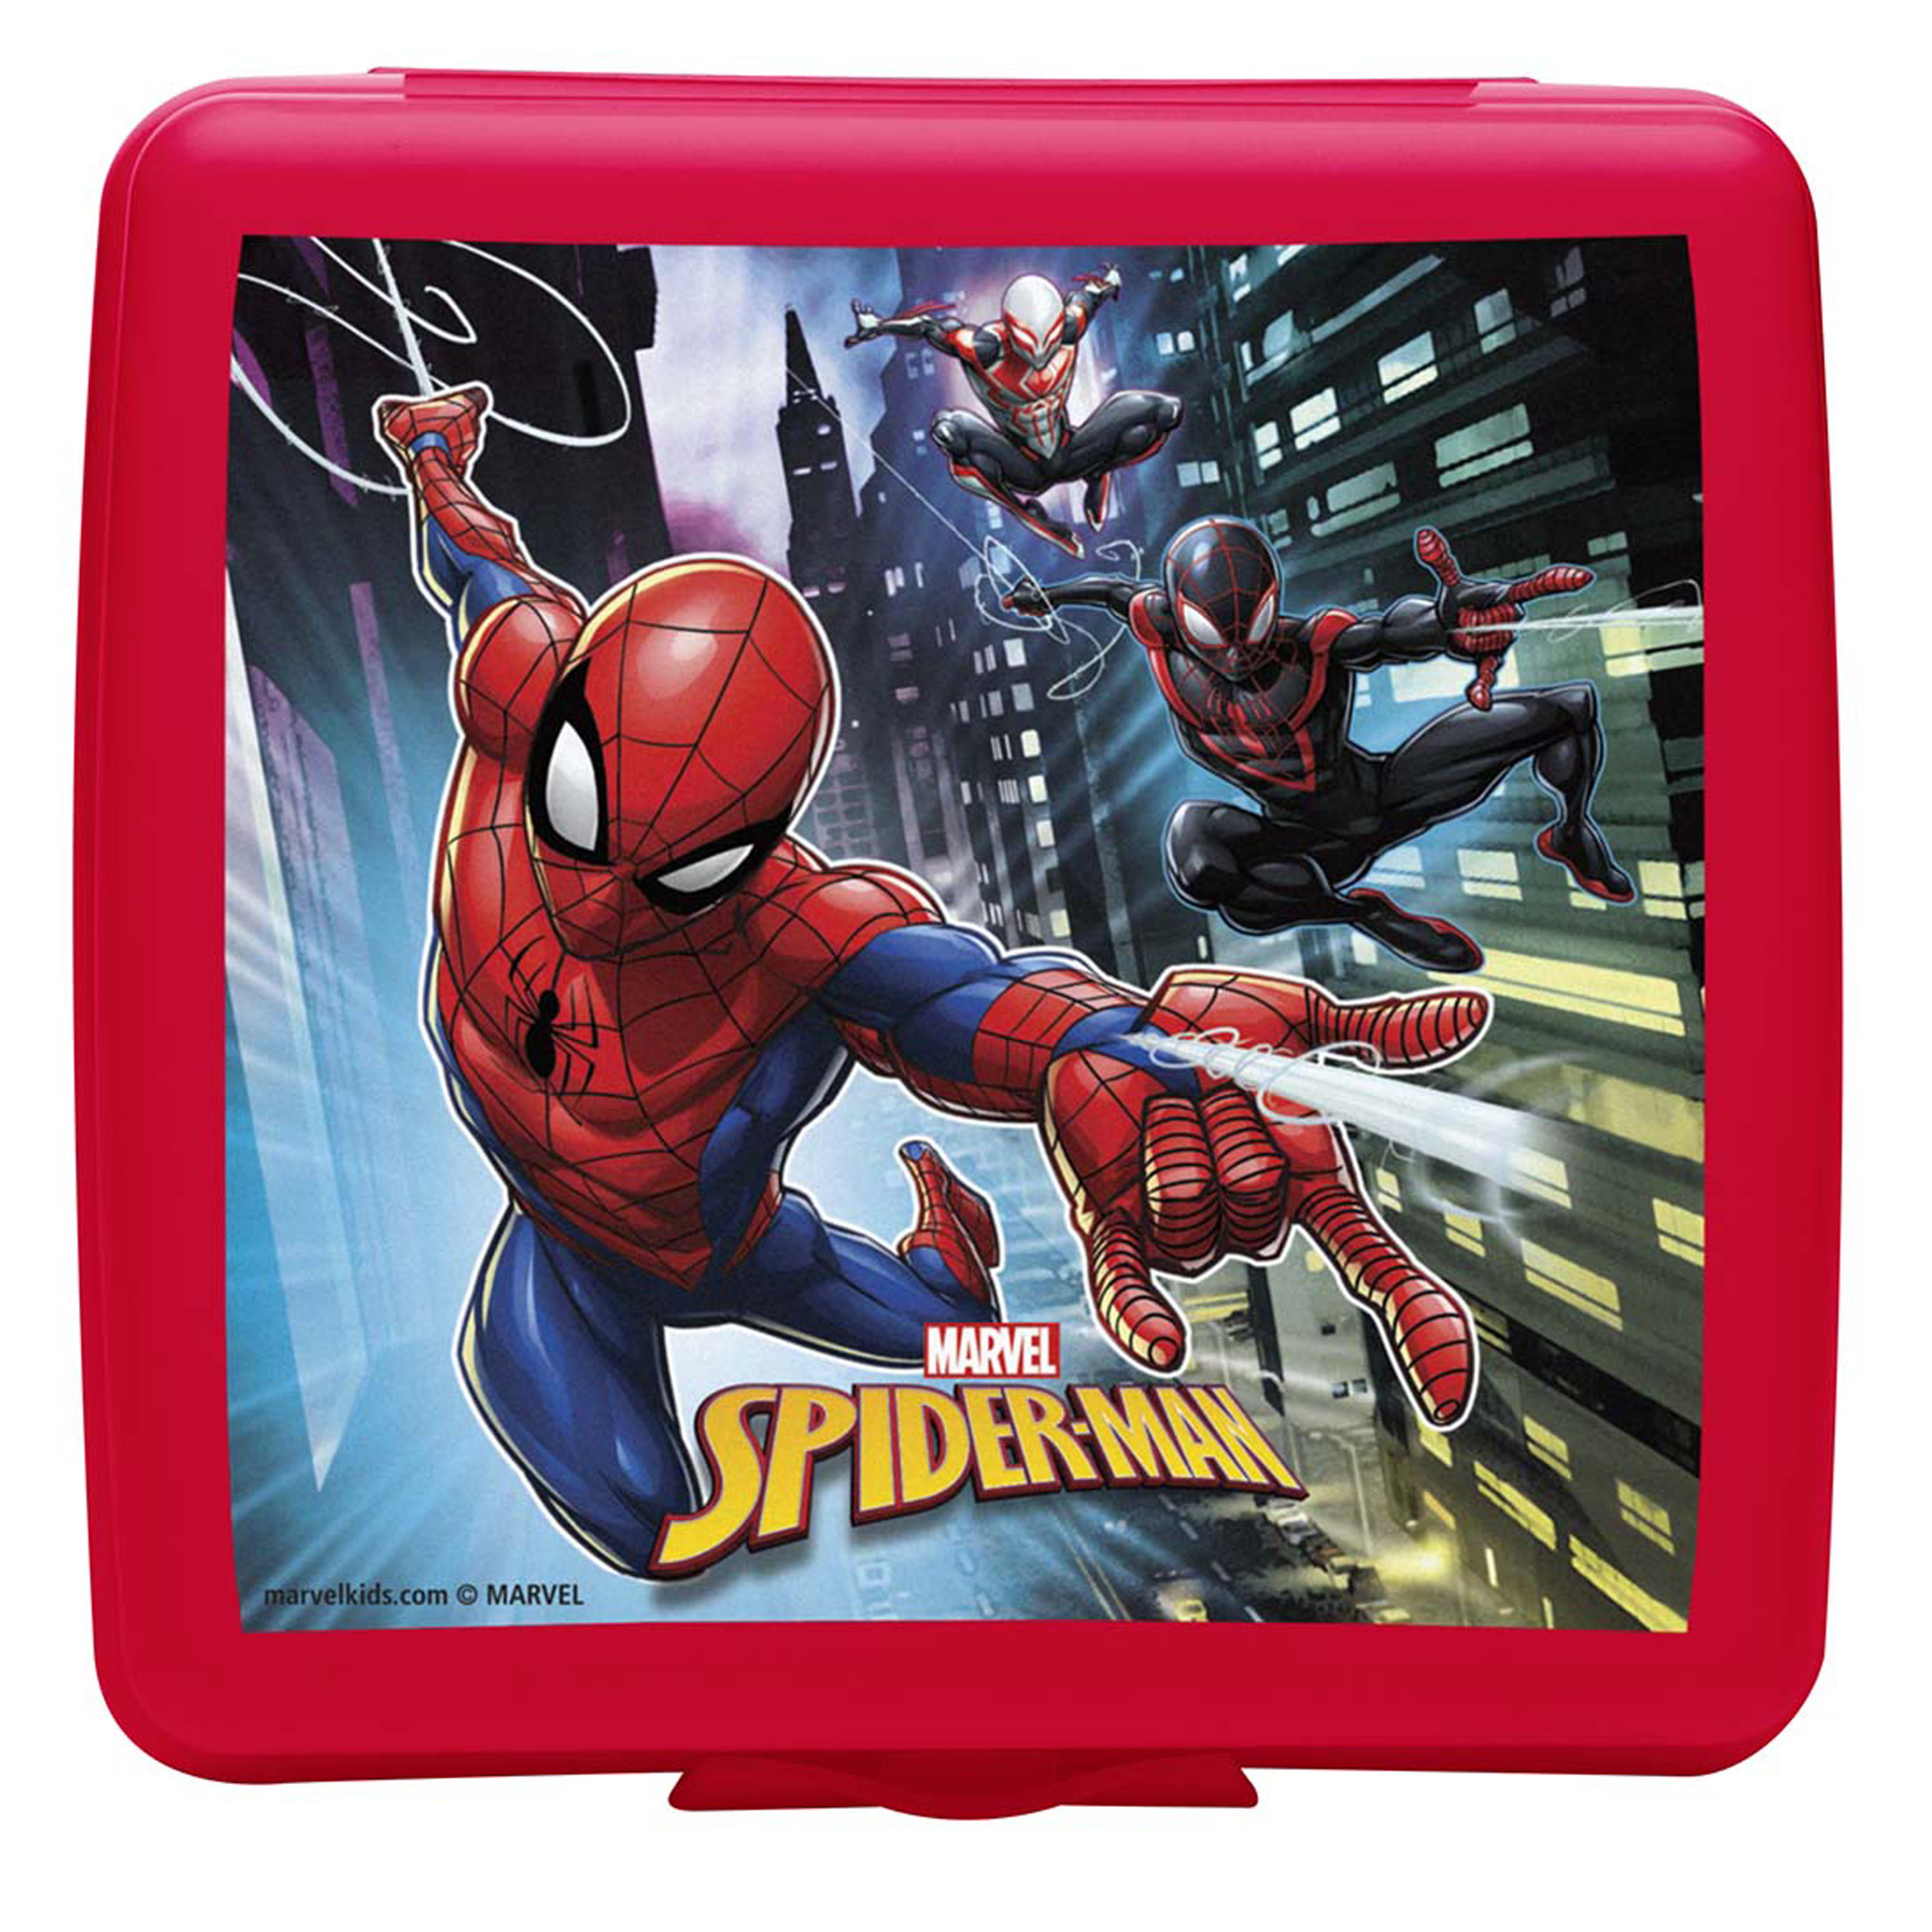 Tiny Baby Shop - Zak Designs Spiderman Lunch Box - Red Marvel Lunch Box for  Boys and Girls with Pull Top Spiderman Water Bottle, Hard Top Kids Lunch Box  with Water Bottle